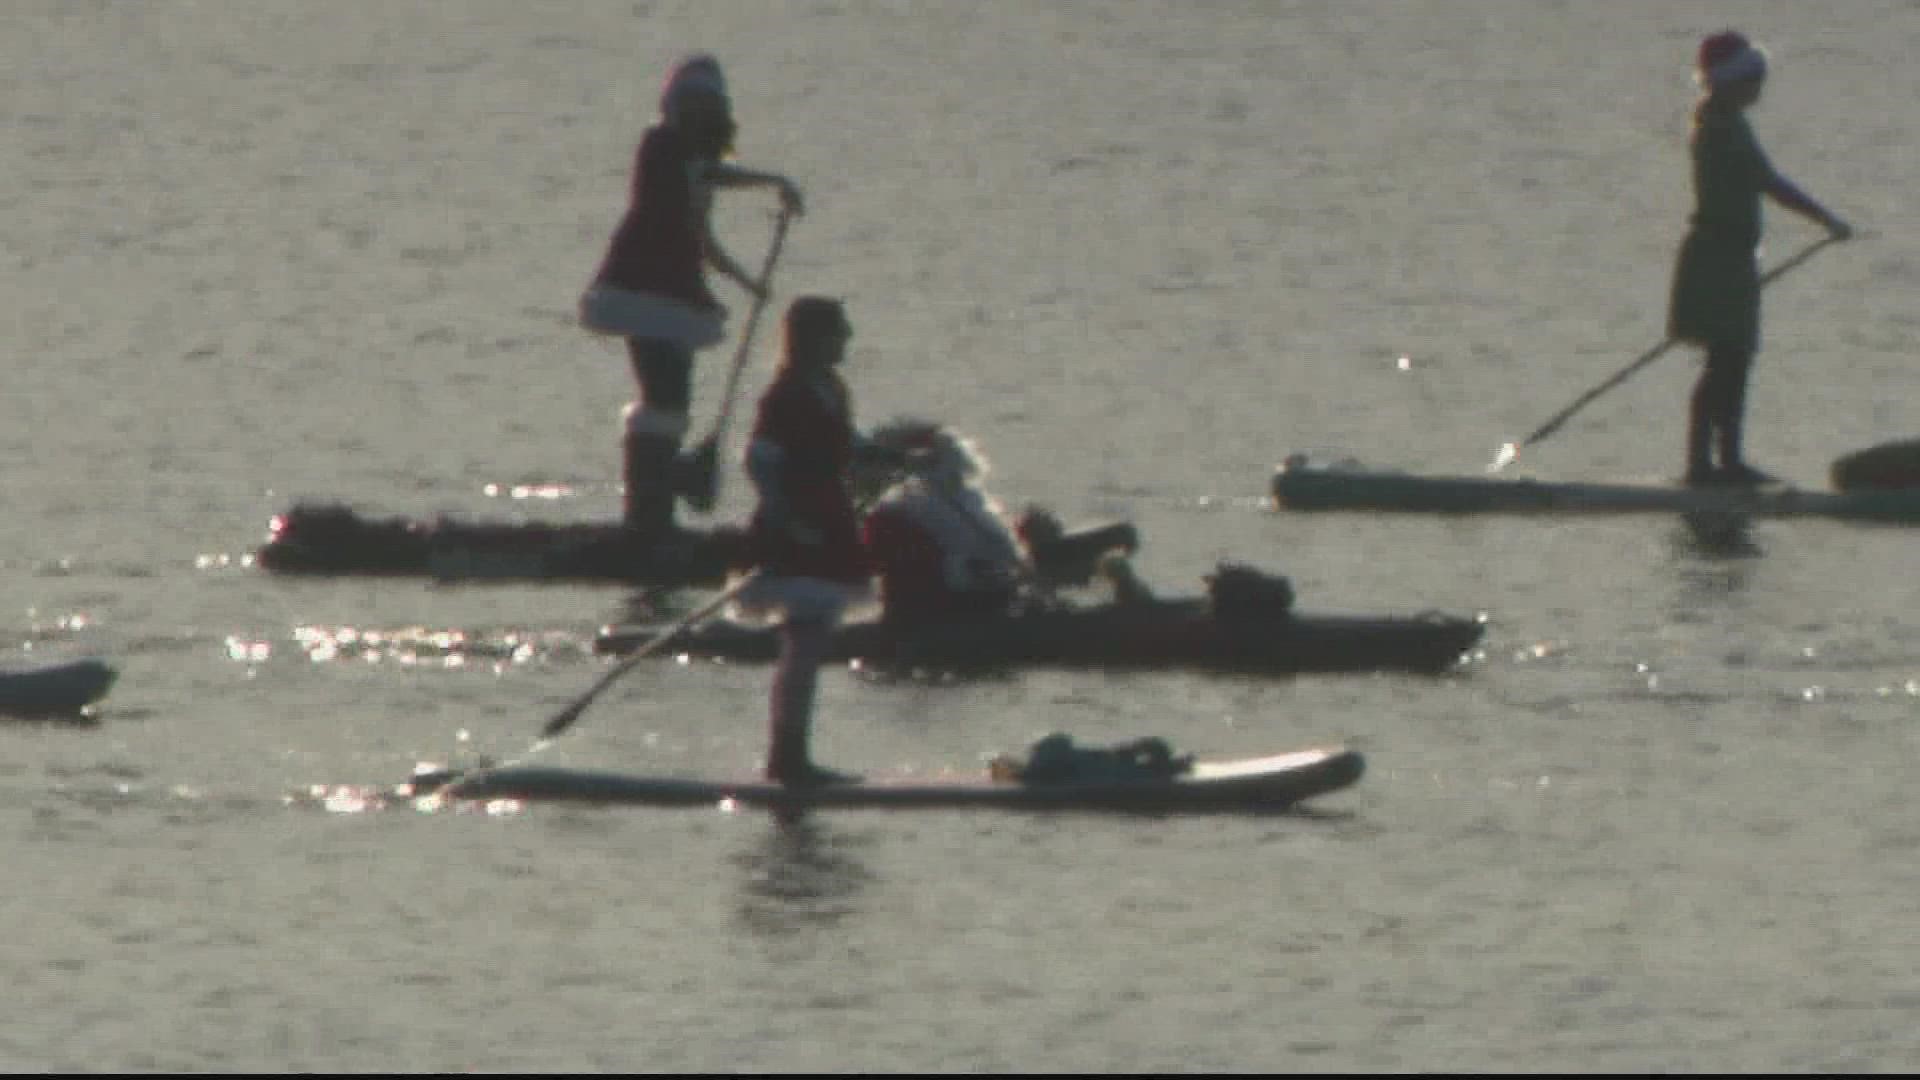 More than 50 people got into the holiday spirit by paddling their way across Roosevelt Island.